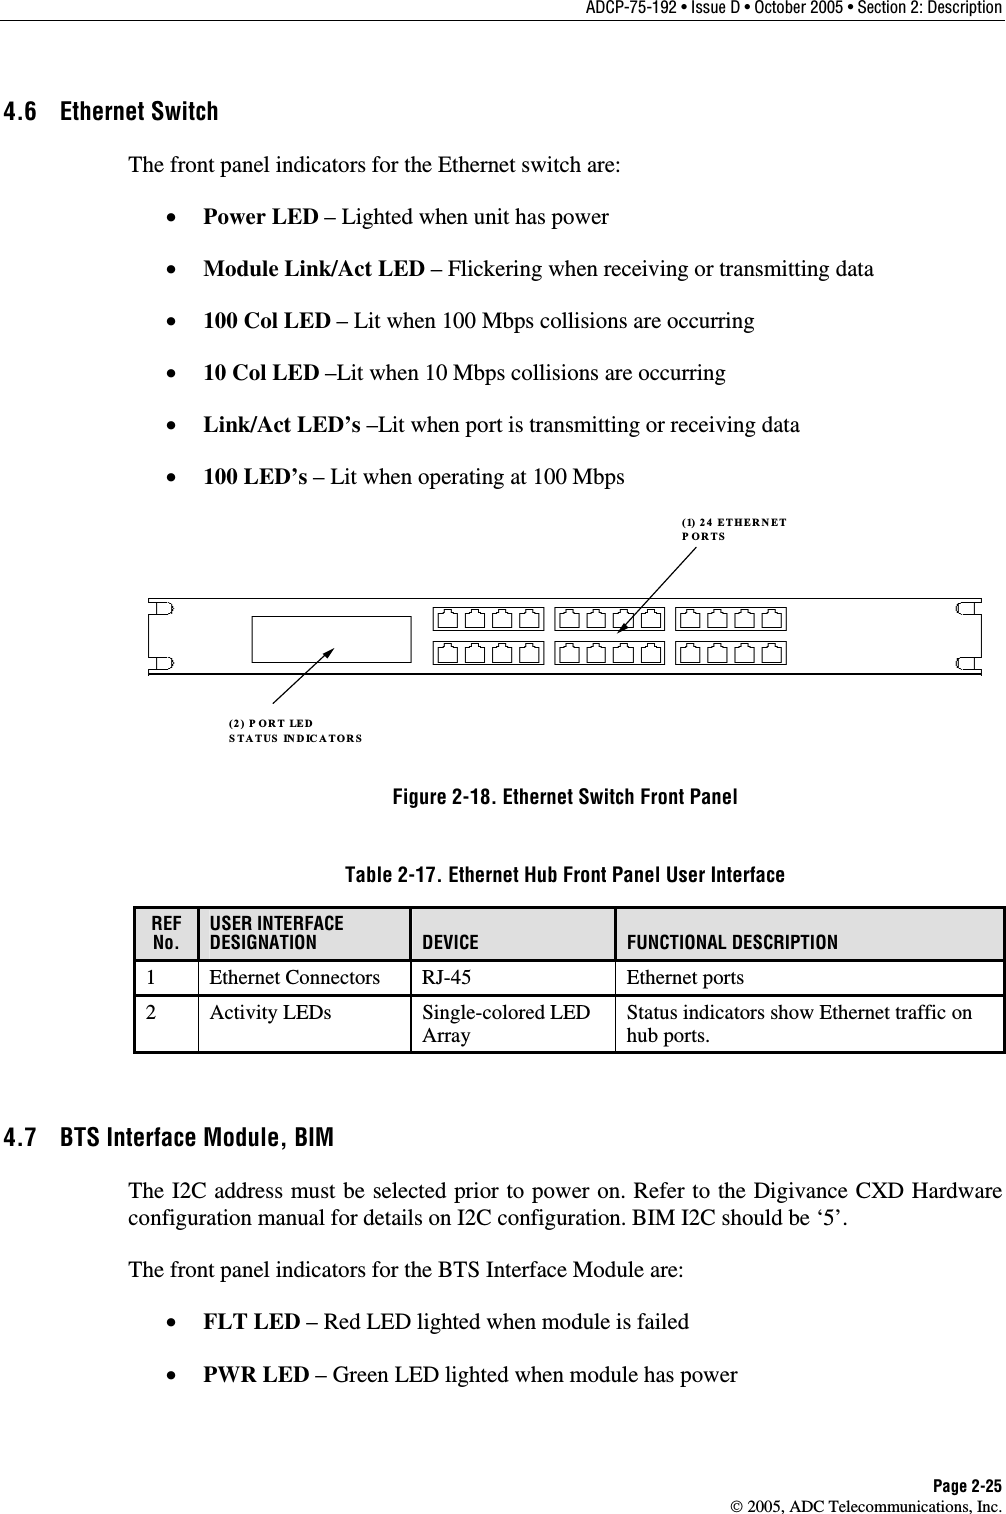 ADCP-75-192 • Issue D • October 2005 • Section 2: Description Page 2-25  2005, ADC Telecommunications, Inc. 4.6  Ethernet Switch  The front panel indicators for the Ethernet switch are: •  Power LED – Lighted when unit has power •  Module Link/Act LED – Flickering when receiving or transmitting data •  100 Col LED – Lit when 100 Mbps collisions are occurring •  10 Col LED –Lit when 10 Mbps collisions are occurring •  Link/Act LED’s –Lit when port is transmitting or receiving data •  100 LED’s – Lit when operating at 100 Mbps (2) P ORT LED STATUS INDICATORS(1) 24 ETHERNET PORTS Figure 2-18. Ethernet Switch Front Panel Table 2-17. Ethernet Hub Front Panel User Interface REFNo. USER INTERFACE DESIGNATION  DEVICE  FUNCTIONAL DESCRIPTION 1  Ethernet Connectors  RJ-45  Ethernet ports 2 Activity LEDs  Single-colored LED Array  Status indicators show Ethernet traffic on hub ports.  4.7  BTS Interface Module, BIM  The I2C address must be selected prior to power on. Refer to the Digivance CXD Hardware configuration manual for details on I2C configuration. BIM I2C should be ‘5’. The front panel indicators for the BTS Interface Module are: •  FLT LED – Red LED lighted when module is failed •  PWR LED – Green LED lighted when module has power 